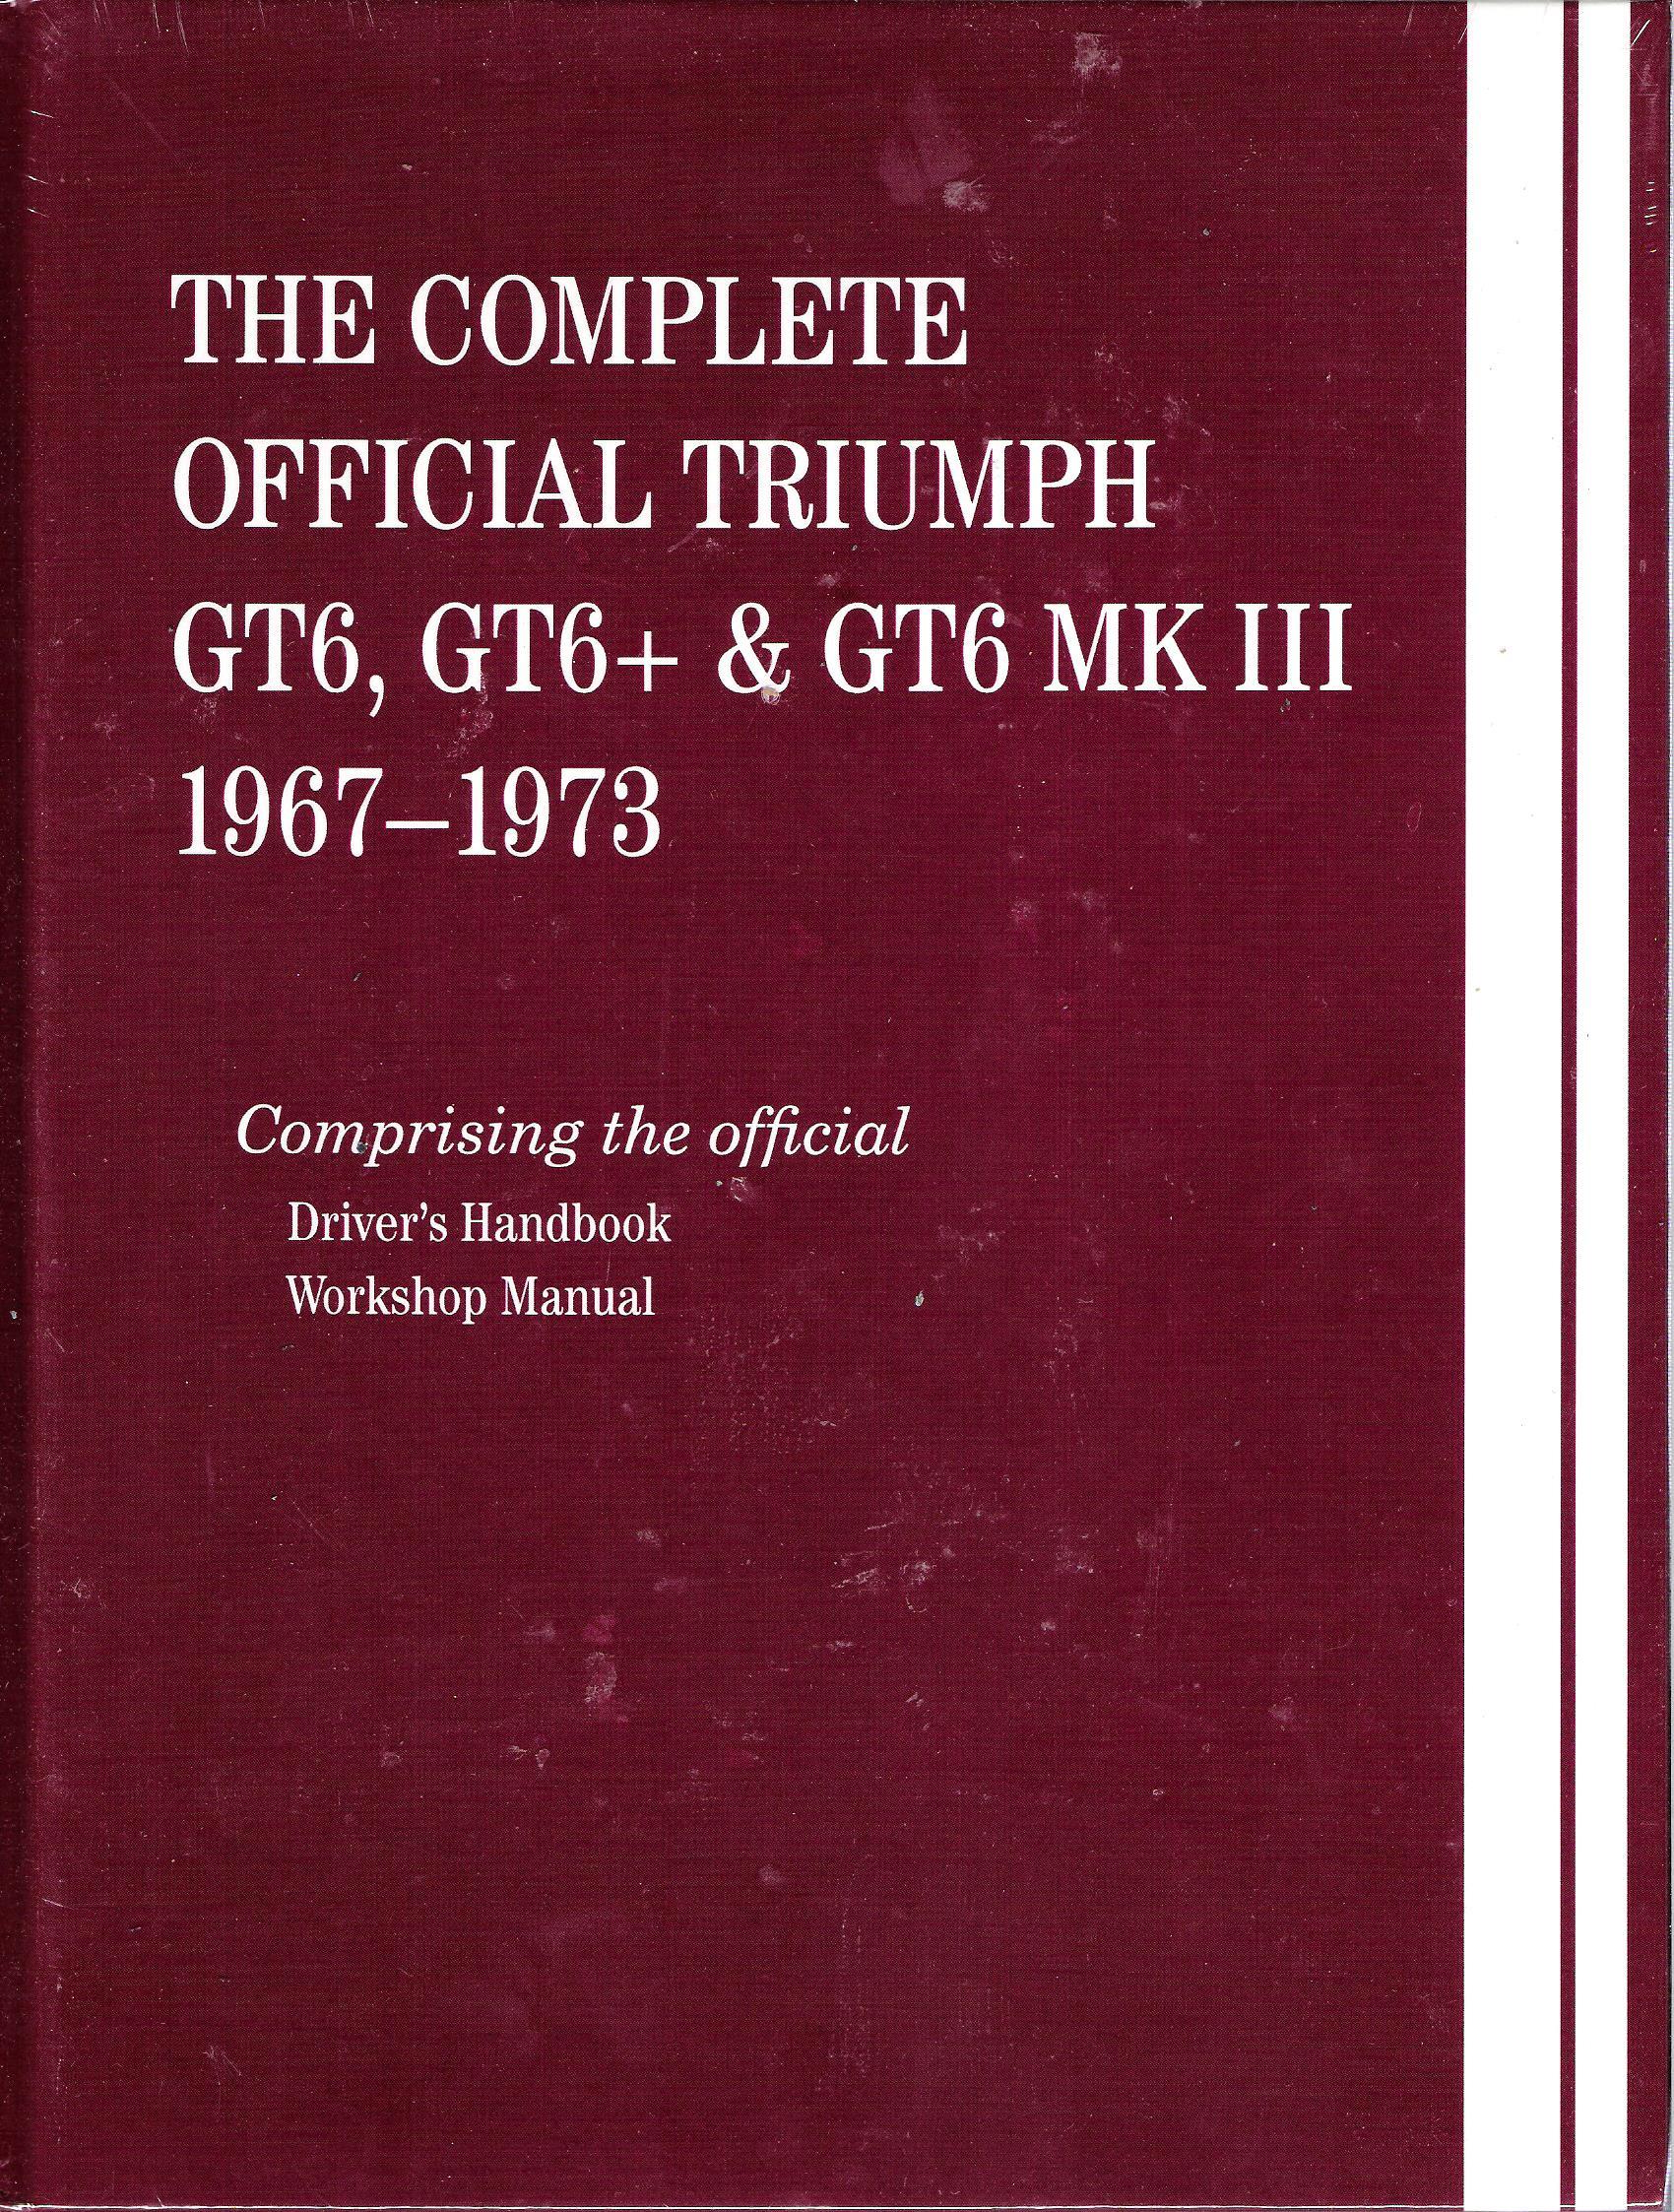 1967-1973 The Complete Official Triumph GT6 GT6+ GT6 MK III Bentley Factory Service Manual